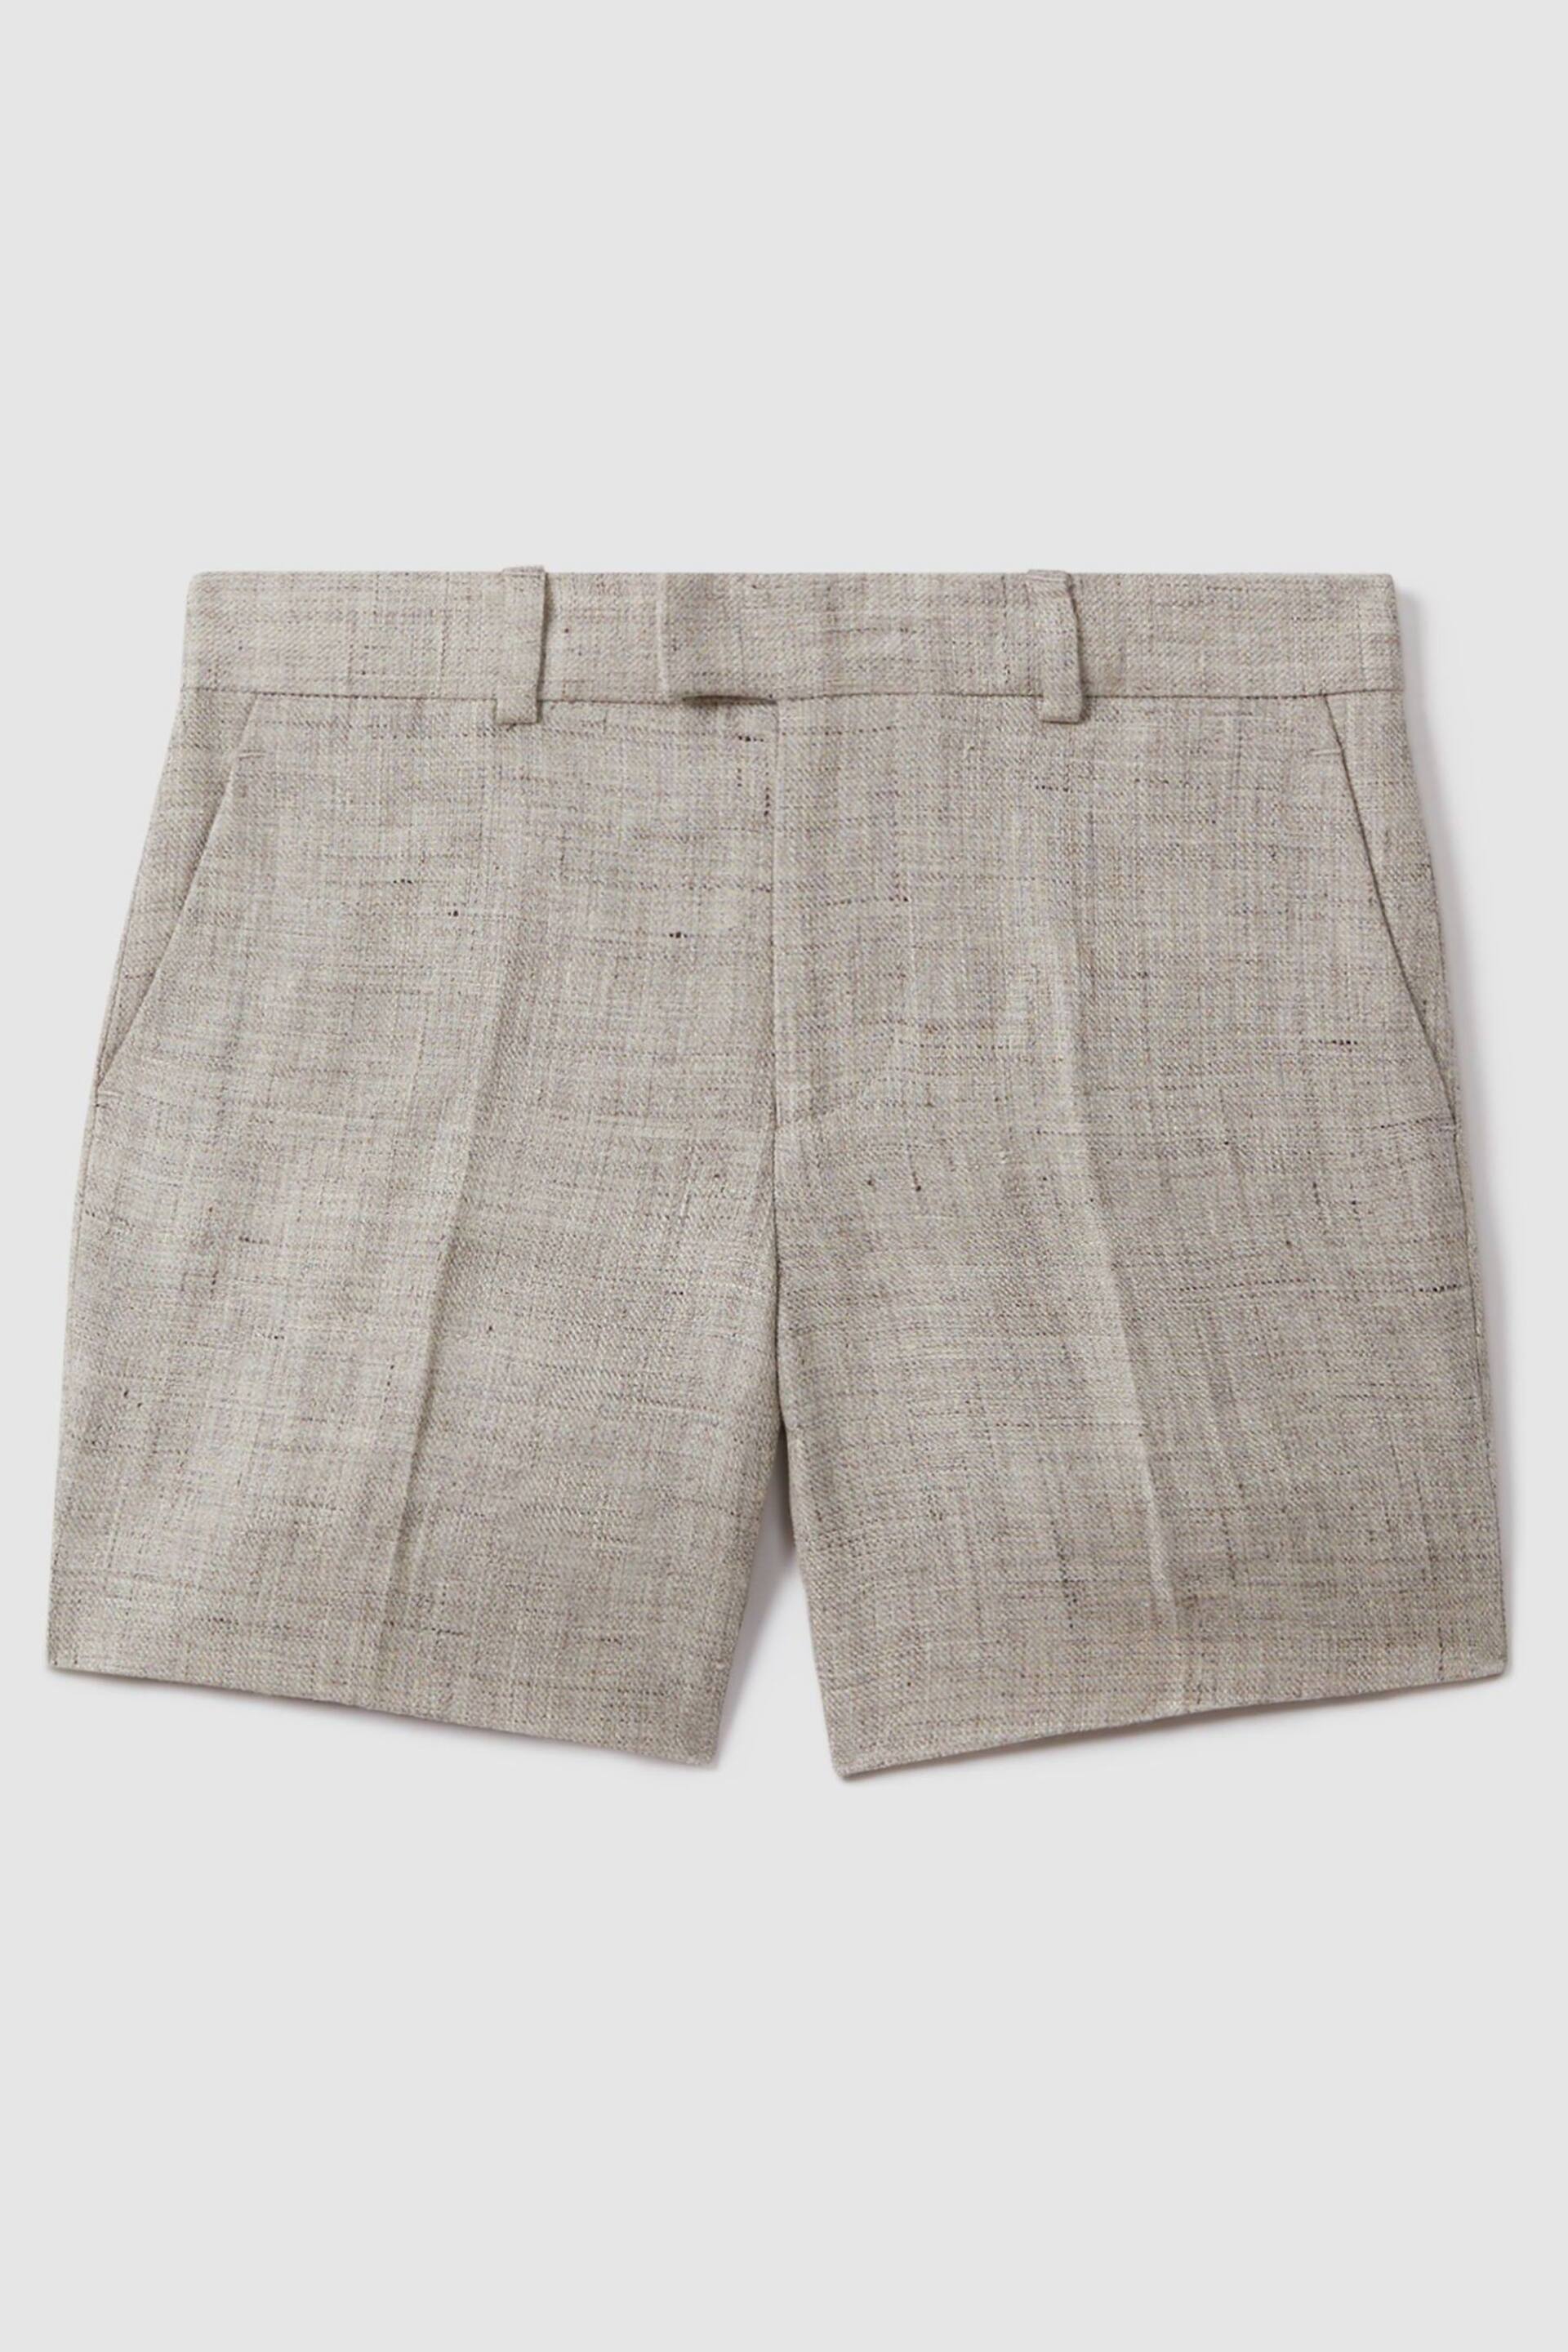 Reiss Oatmeal Auto Junior Tailored Linen Side Adjuster Shorts - Image 2 of 4